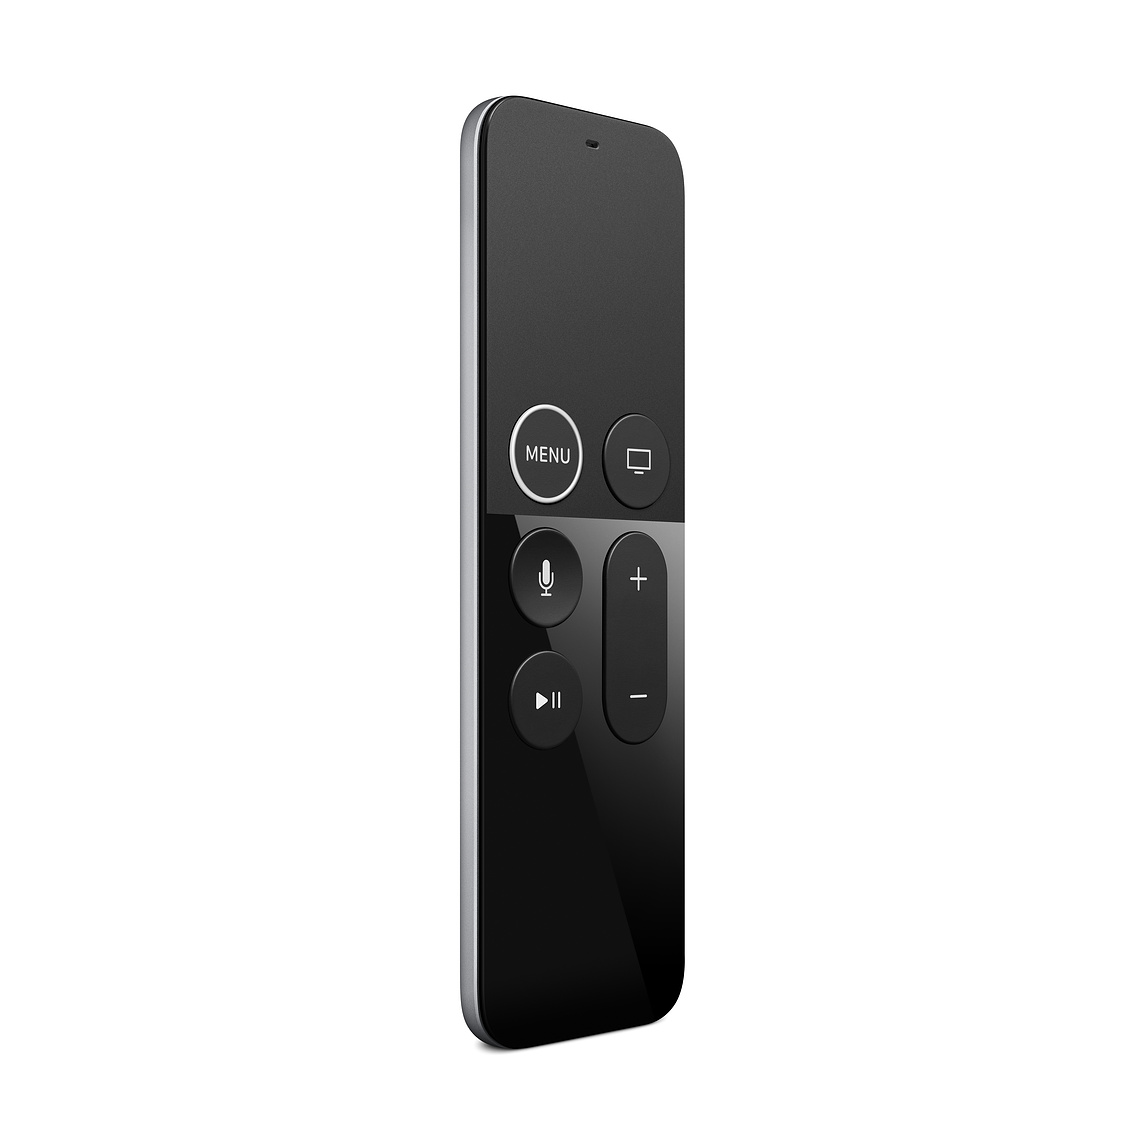 kans Trolley Baby Apple TV Remote: What are your options to control the Apple TV? - 9to5Mac